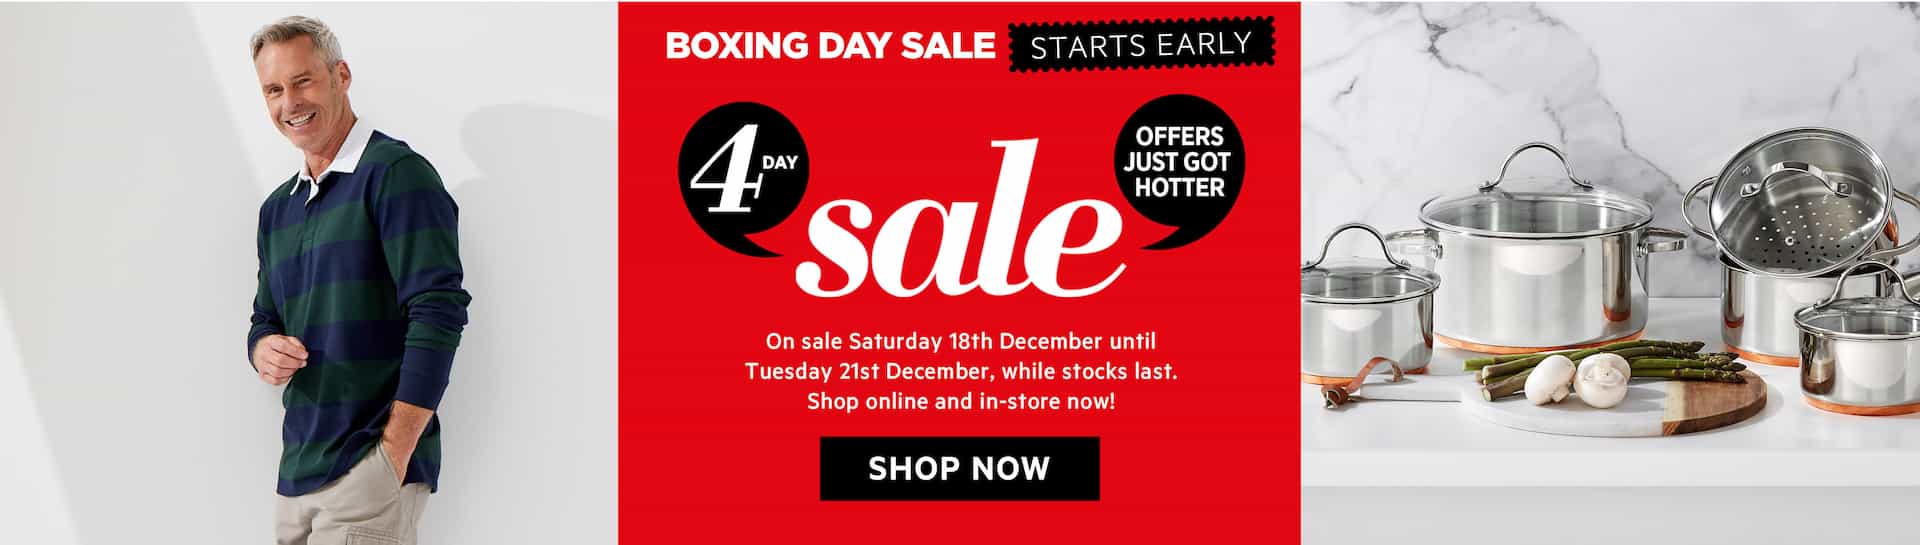 Harris Scarfe Boxing Day sale up to 60% OFF on kitchenware, clothing, footwear & more